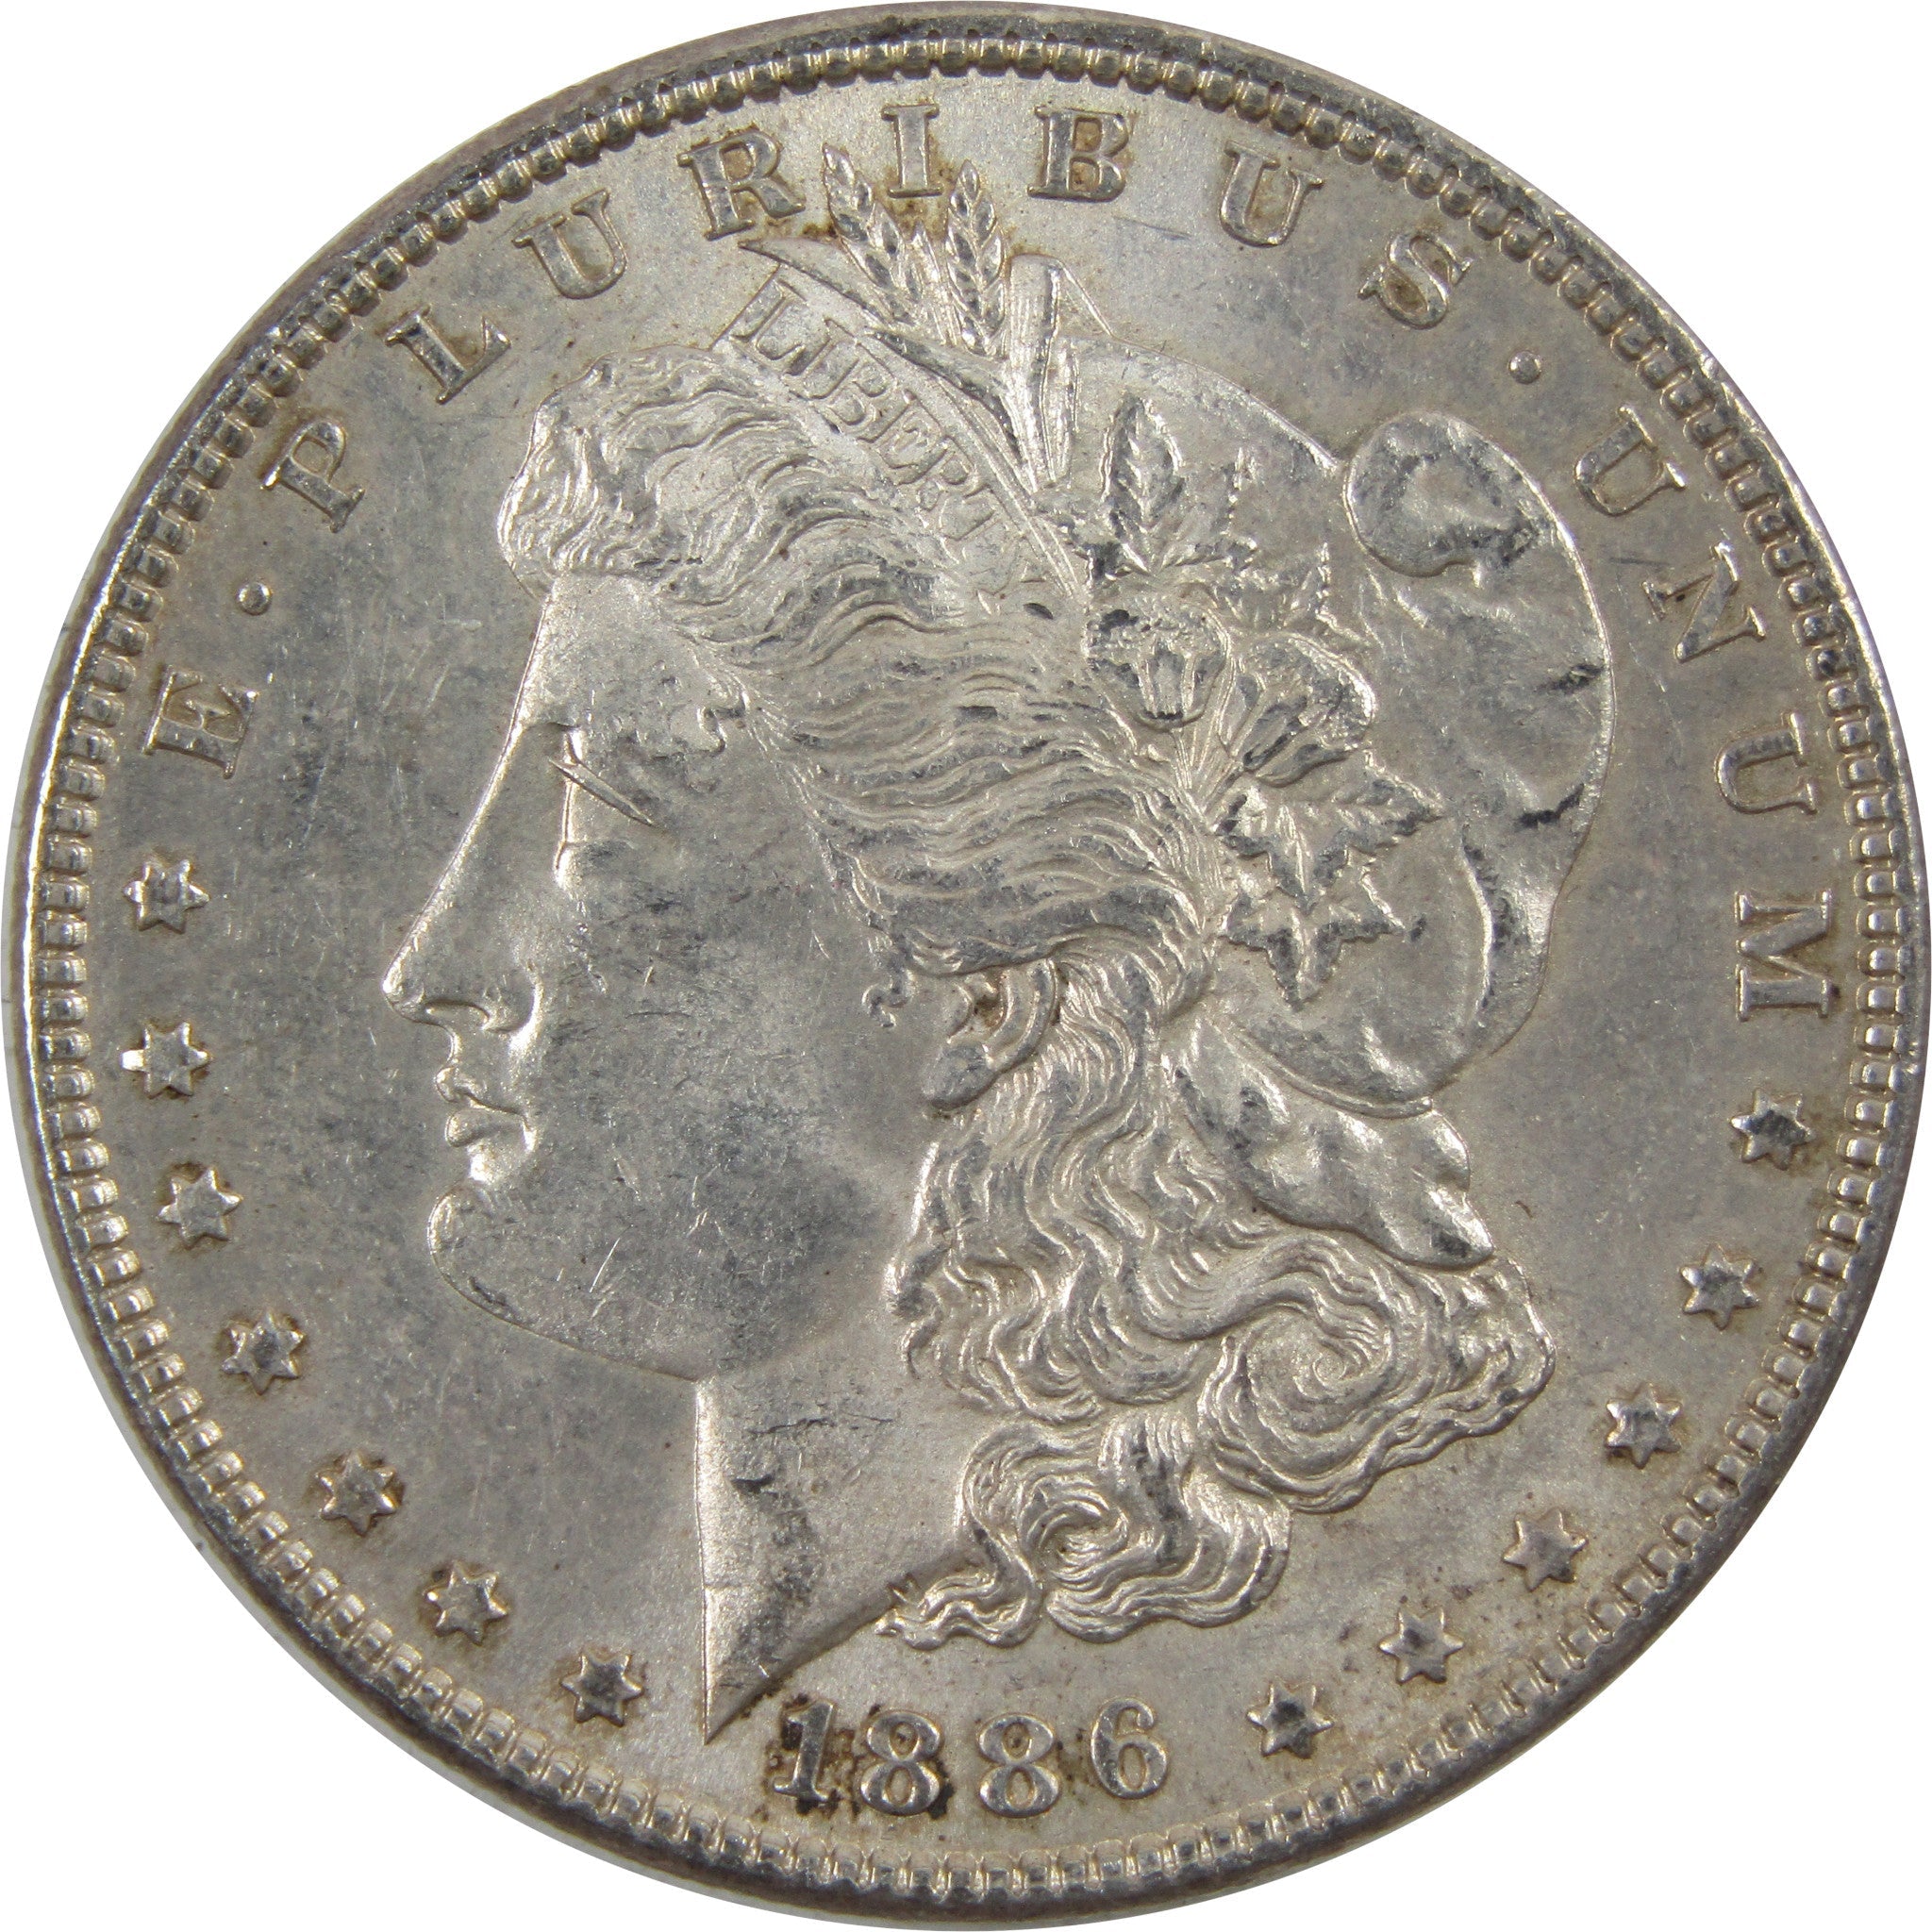 1886 Morgan Dollar AU About Uncirculated 90% Silver $1 Coin SKU:I5491 - Morgan coin - Morgan silver dollar - Morgan silver dollar for sale - Profile Coins &amp; Collectibles